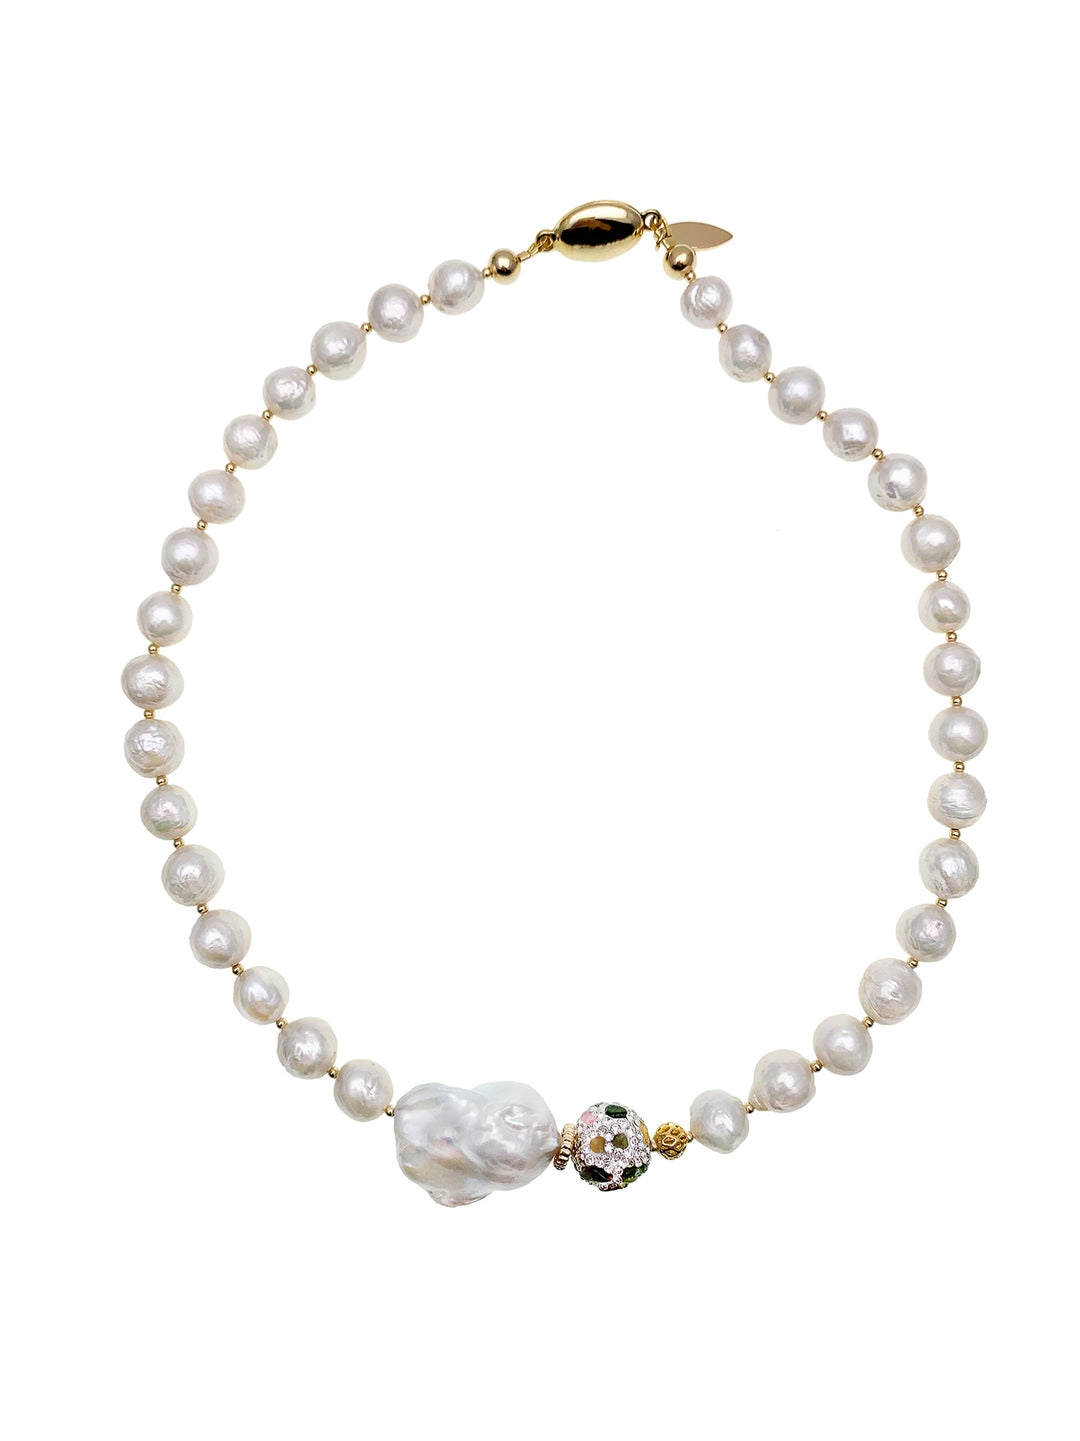 Edison Pearls With Baroque Pearls and Tourmaline Rhinestone Necklace EN026 - FARRA